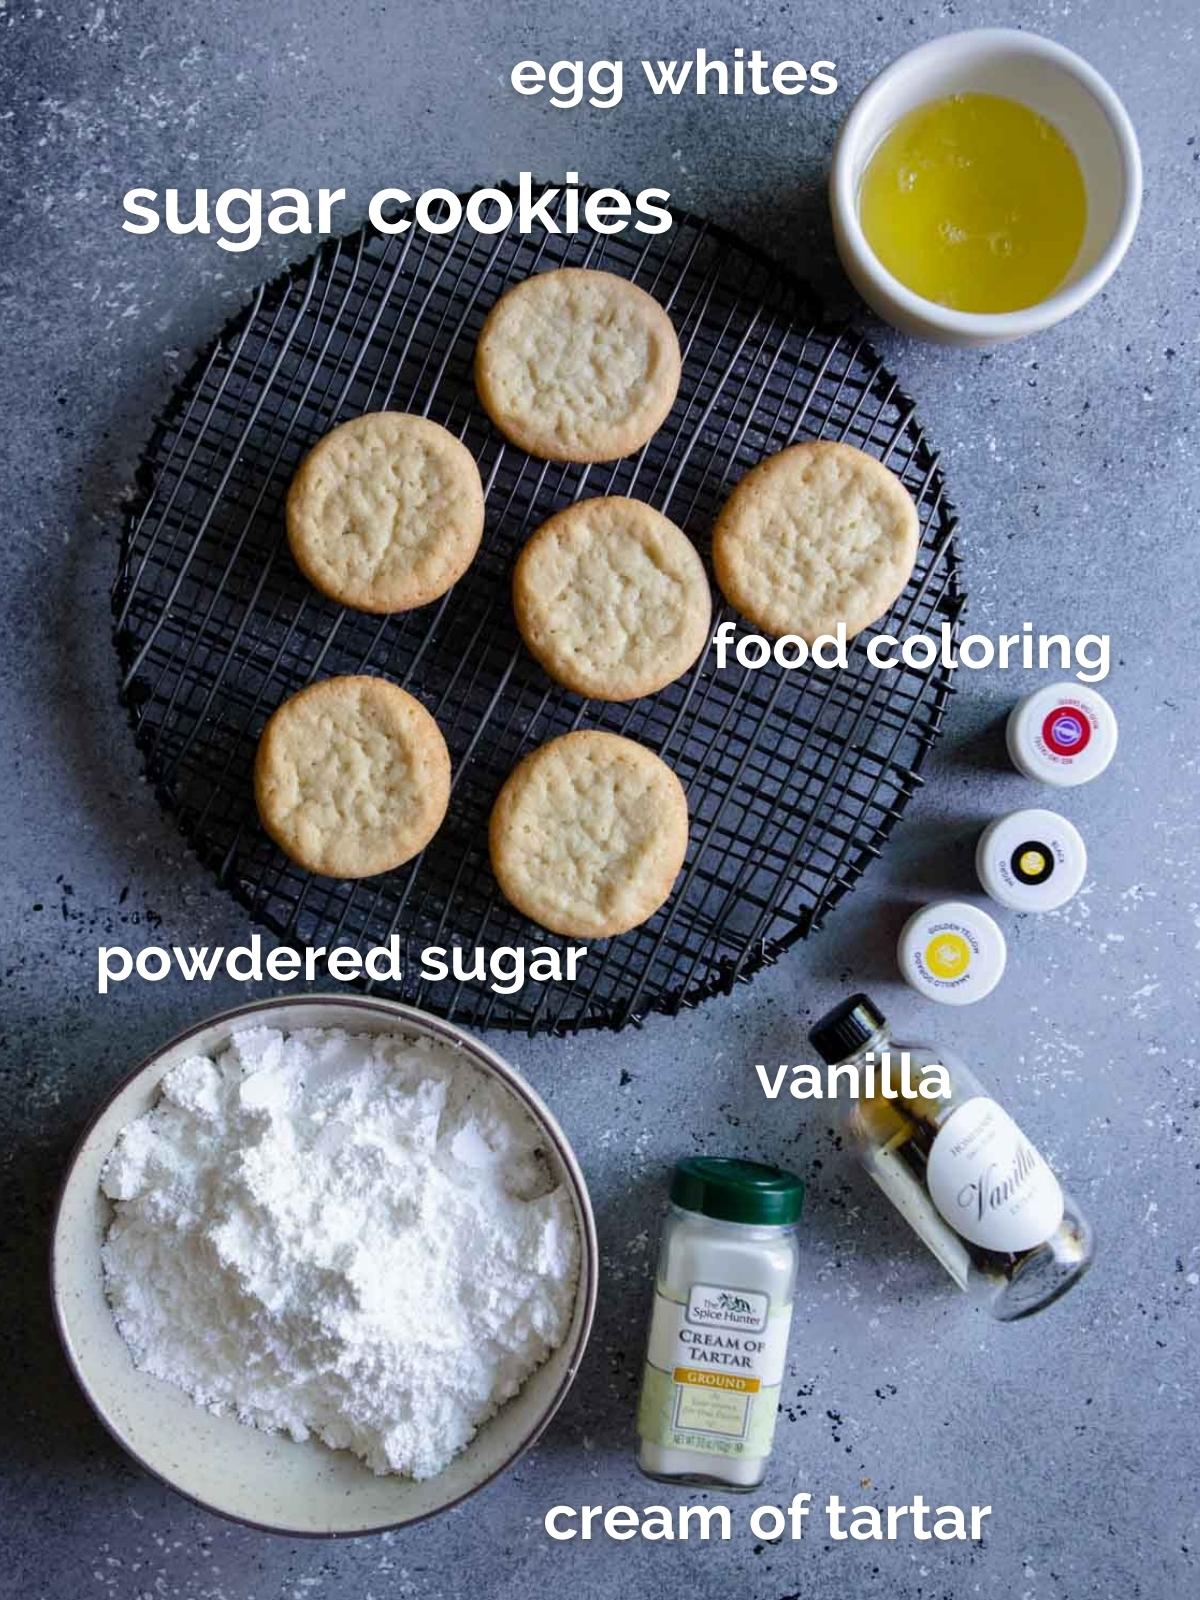 baked sugar cookies, a bowl of powdered sugar, a bowl of egg whites, a jar of cream of tartar, vanilla extract and food colorings 